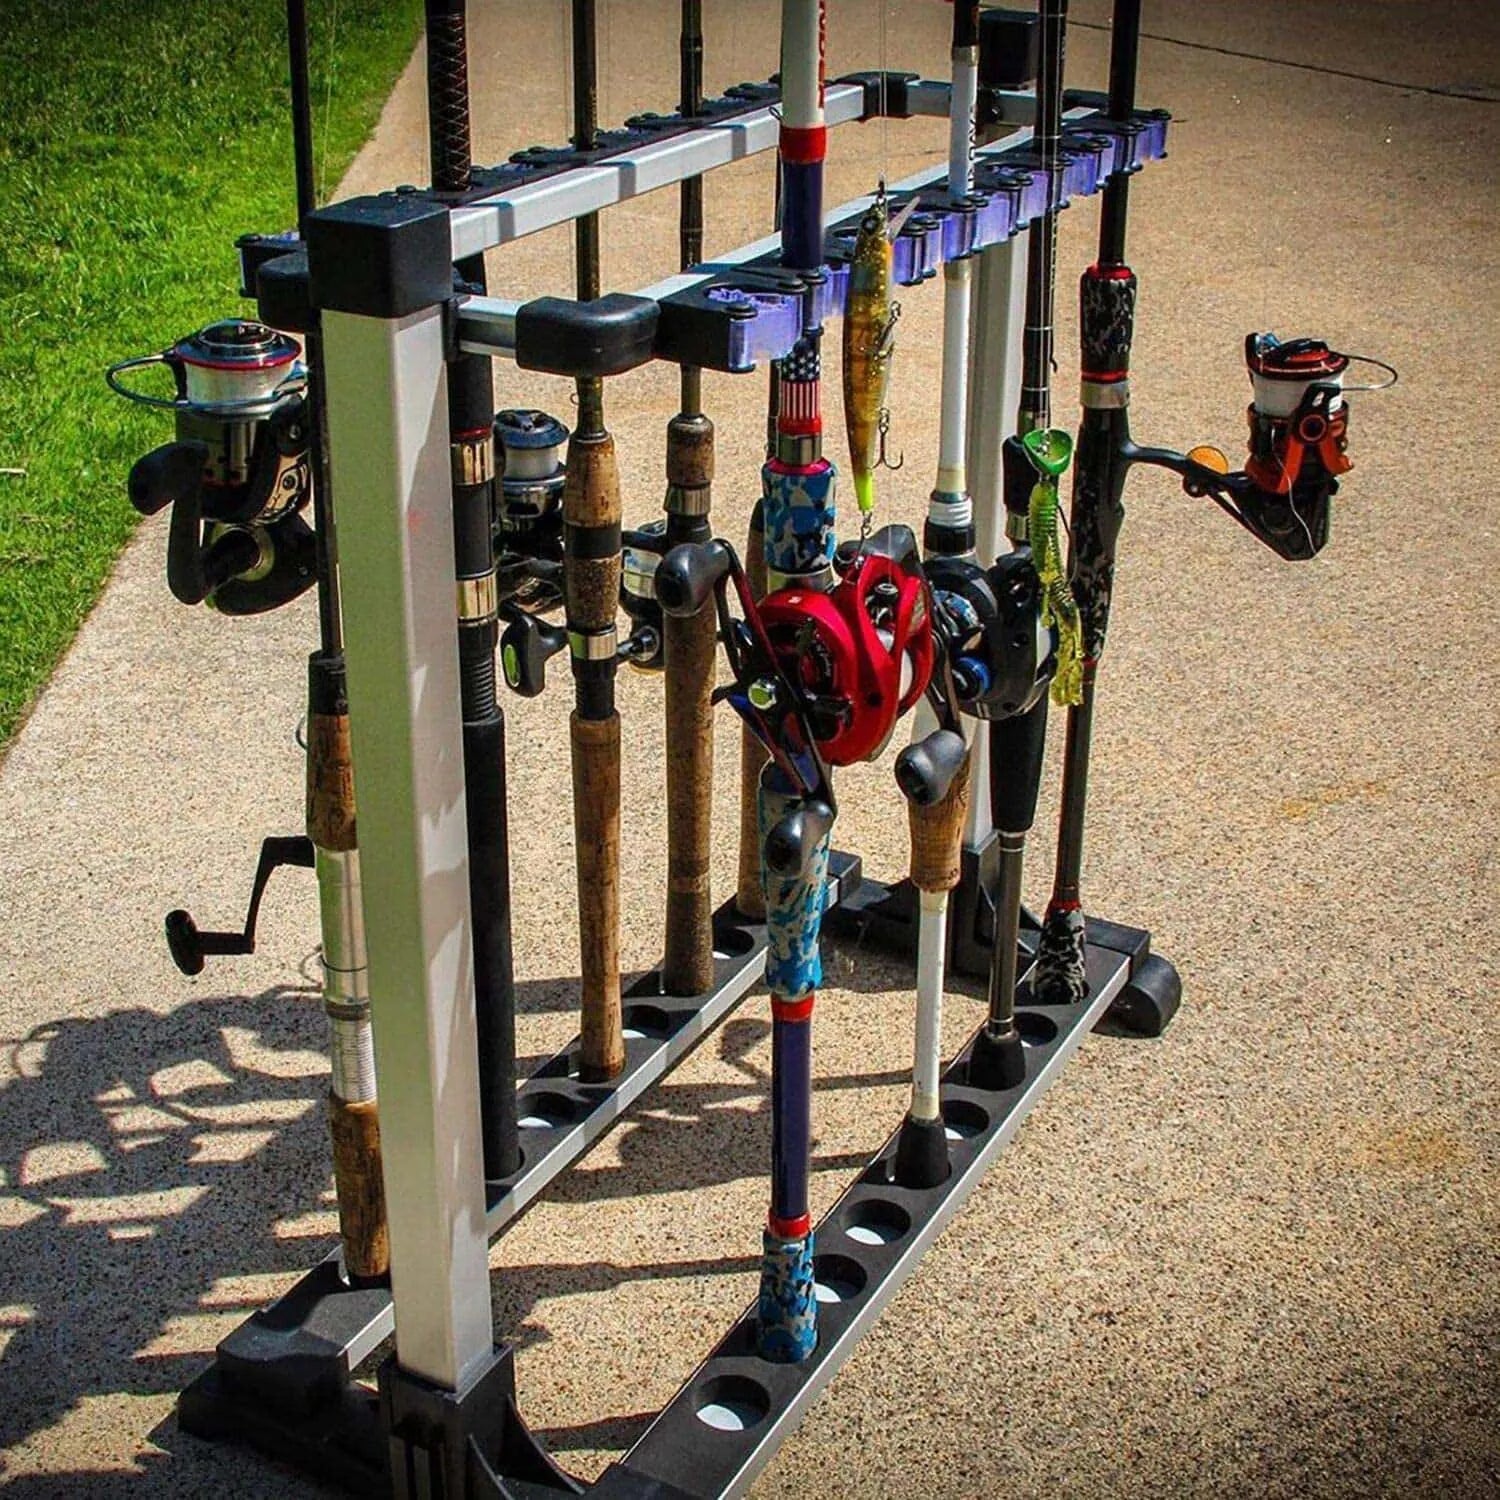 10 Creative DIY Fishing Pole Holder Ideas to Try – Site Title